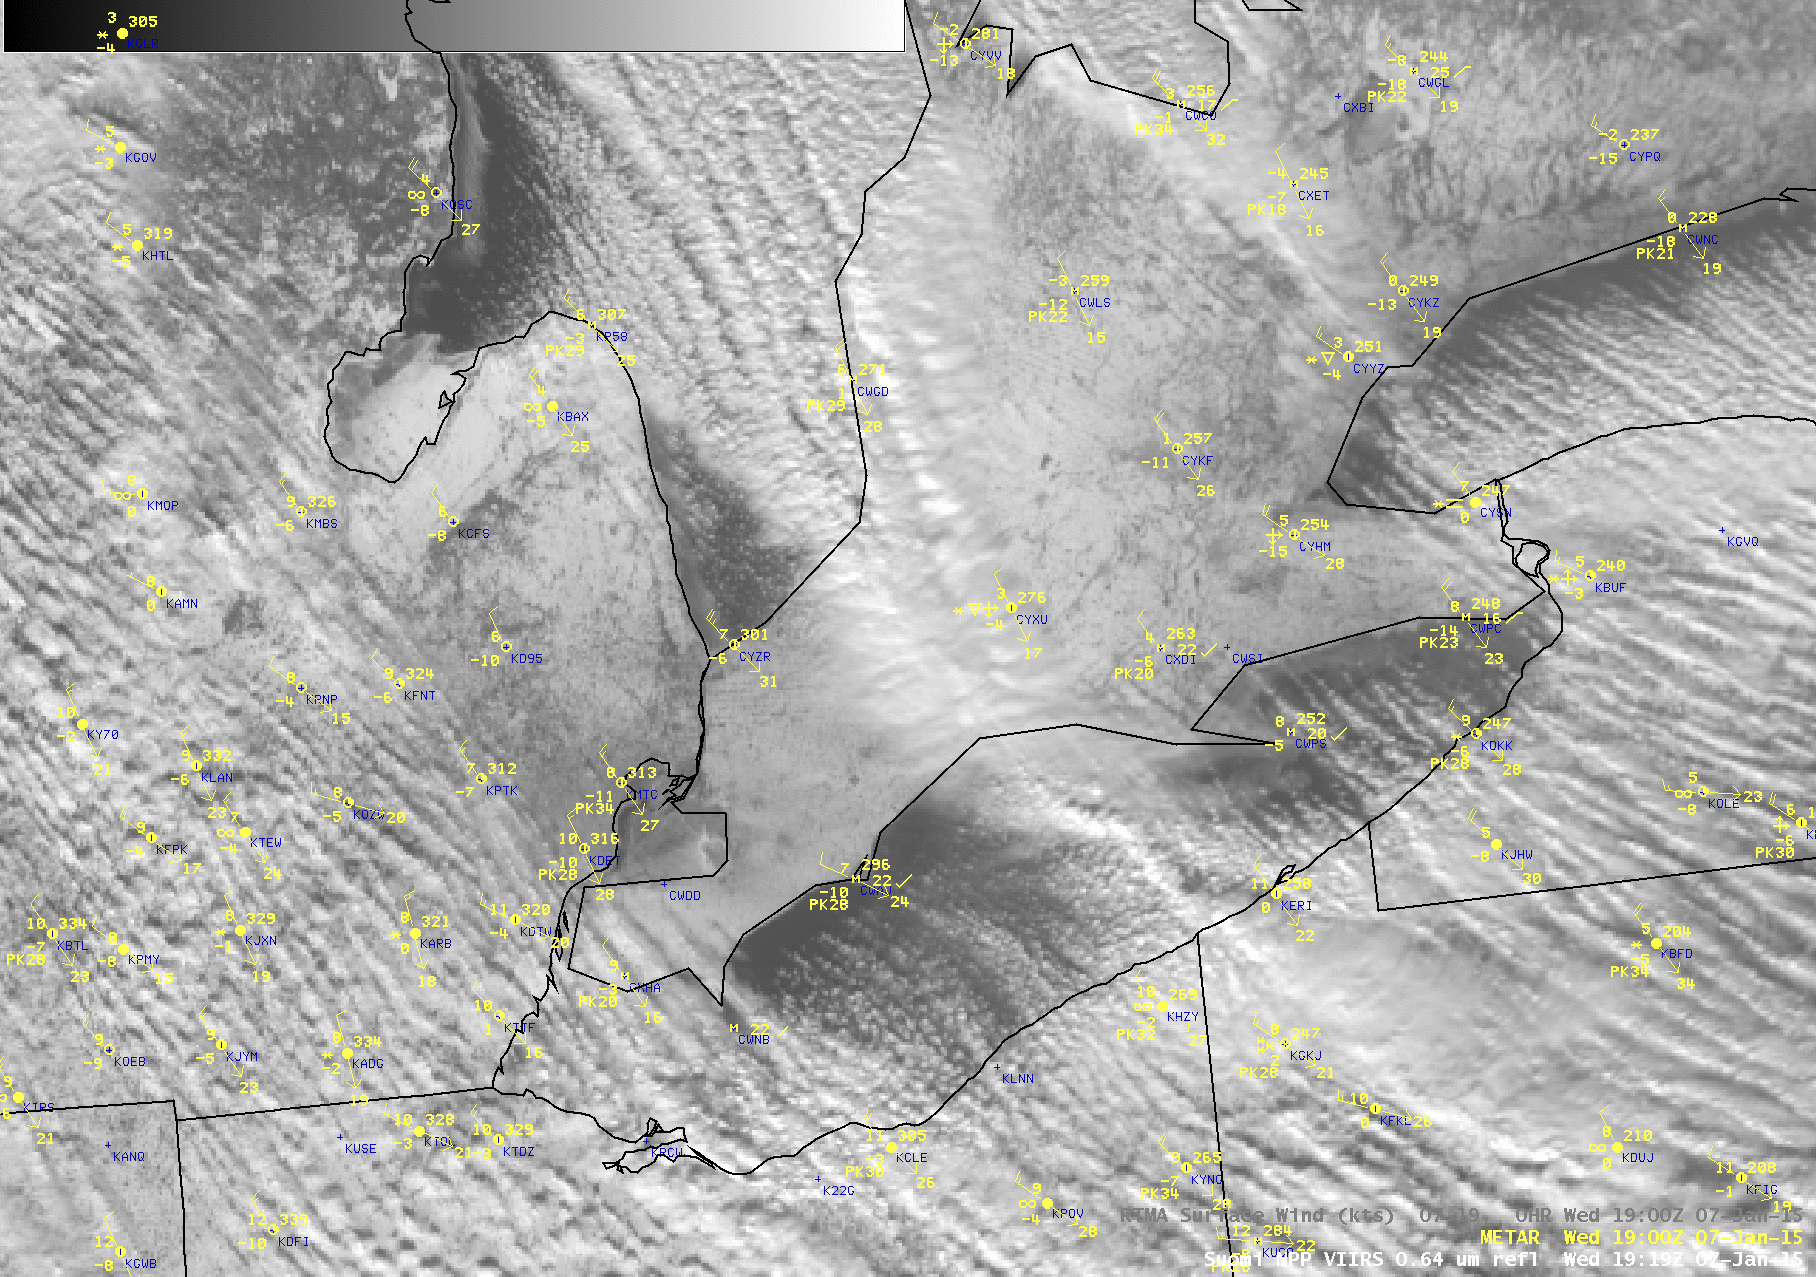 Suomi NPP VIIRS 0.64 µm visible image, with surface METARs, RTMA winds, and frontal boundaries